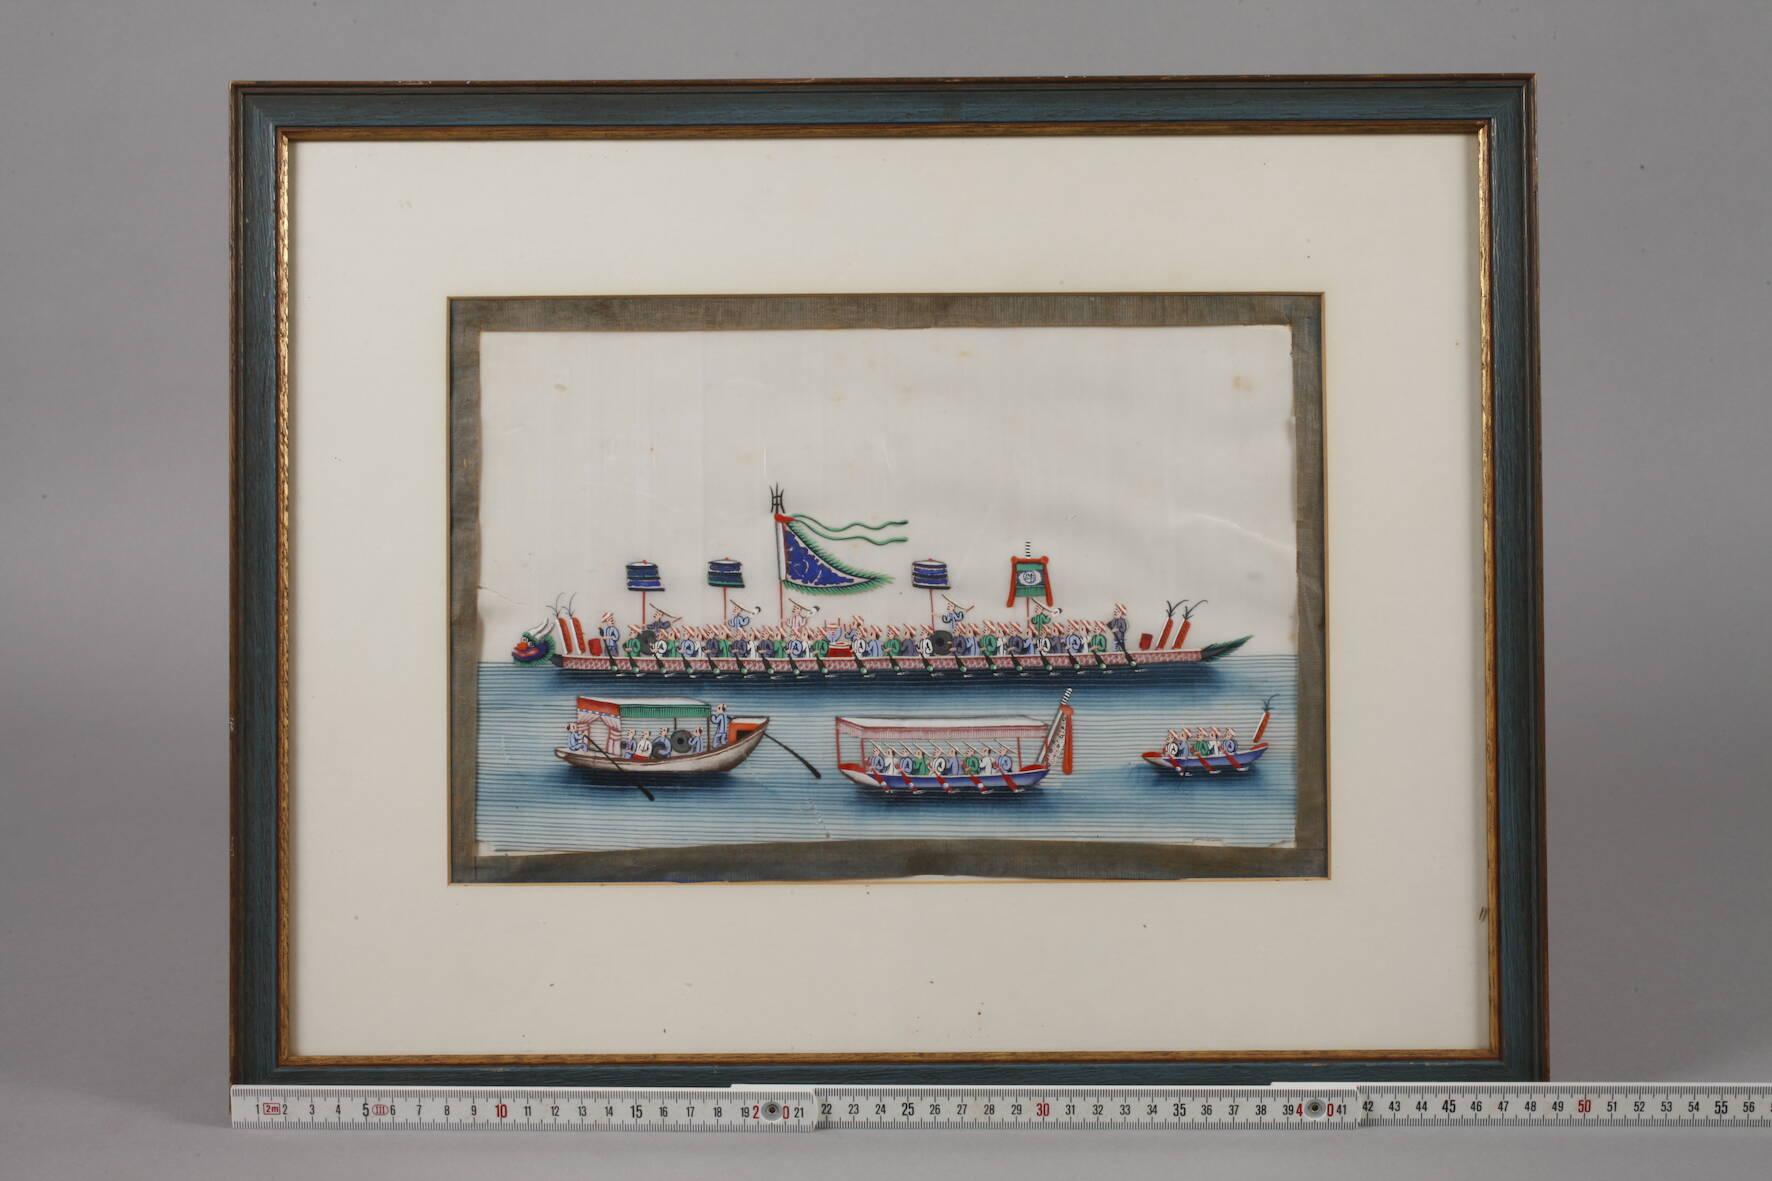 A fine depiction of the Imperial Chinese Dragon Boat at sea. Maker and year of production unknown, but most likely 19th century. The artwork is Gouache on Ricepaper. Modern frame. 

Condition: Fair. A few faint brown spots and a few tears but